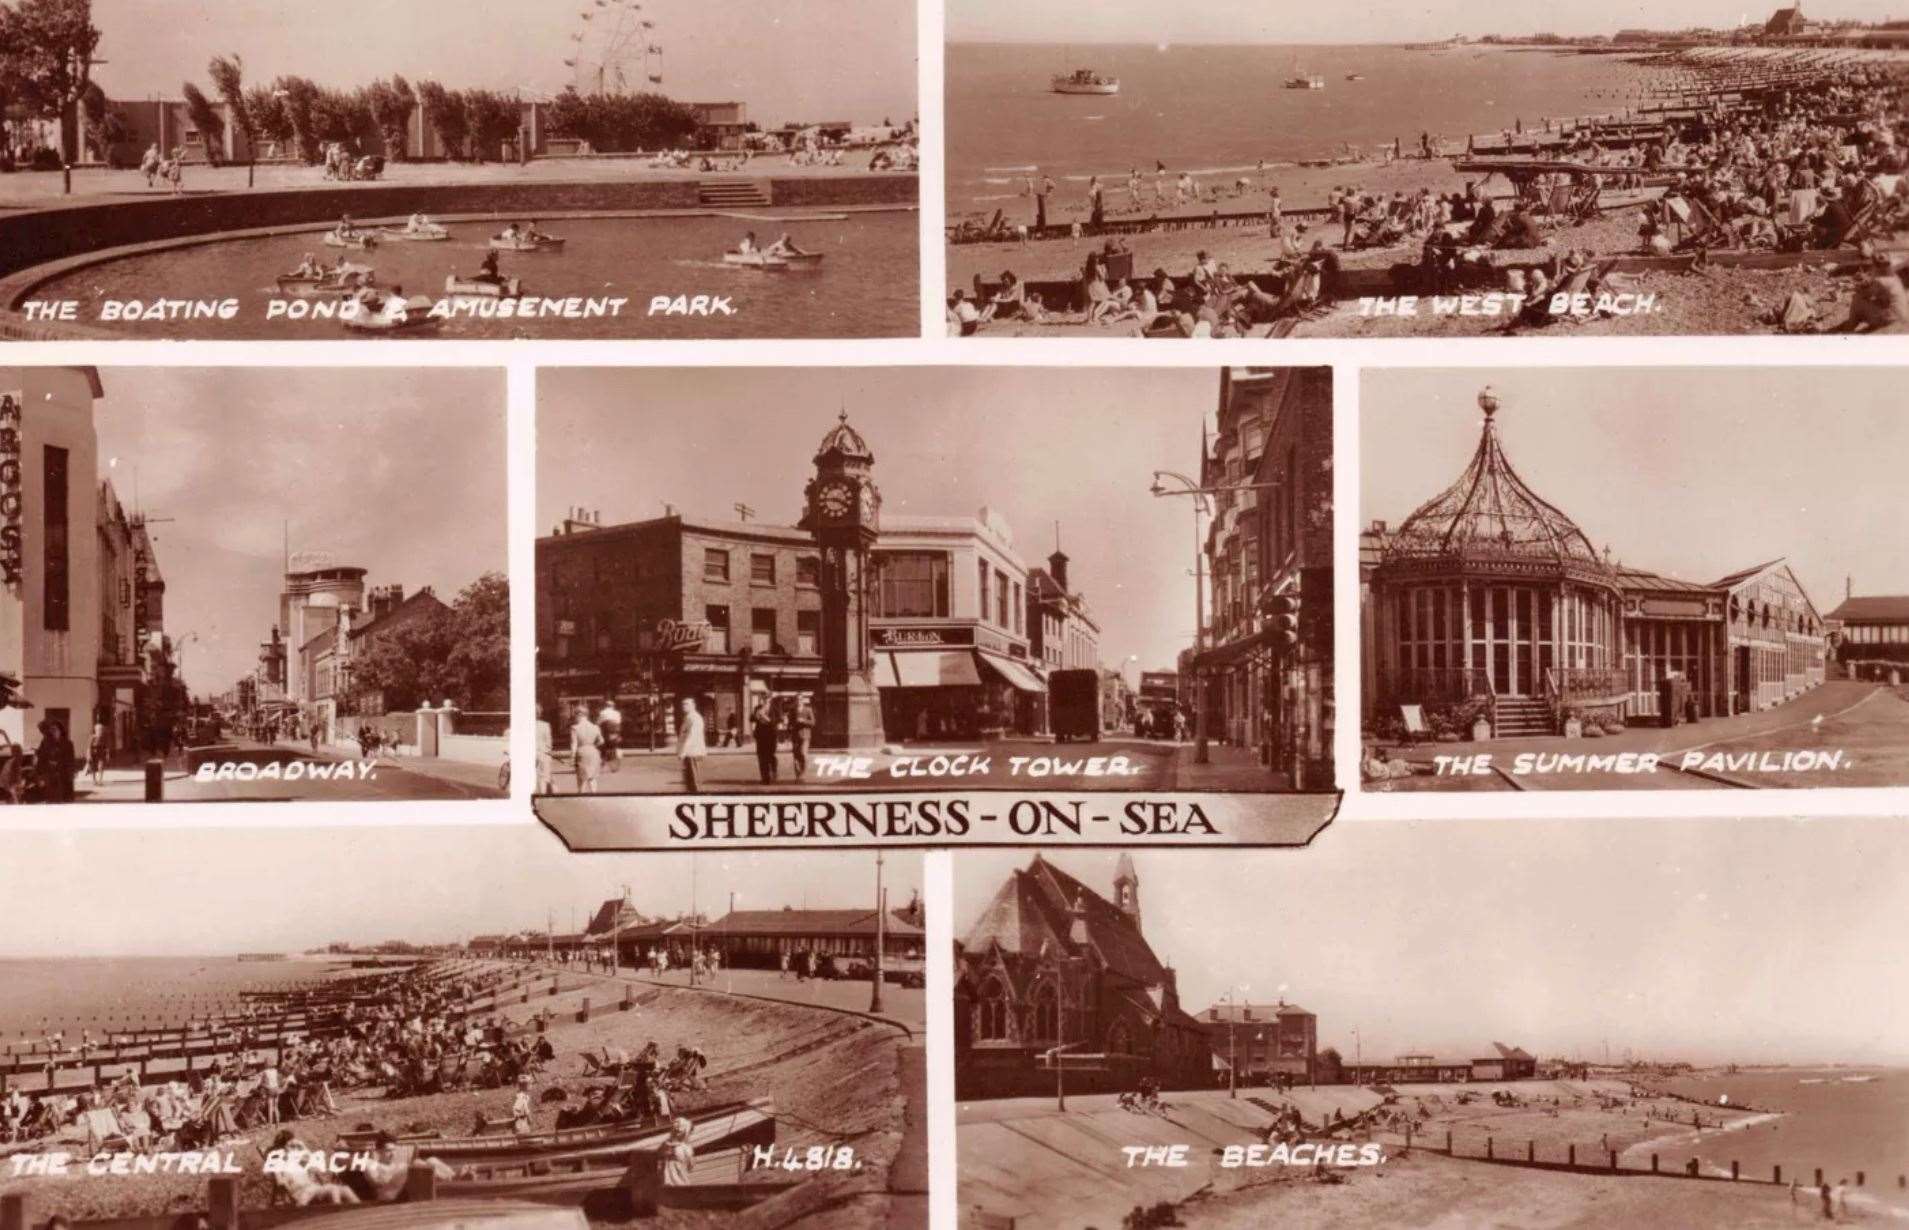 A postcard showing Sheerness in the 1950s